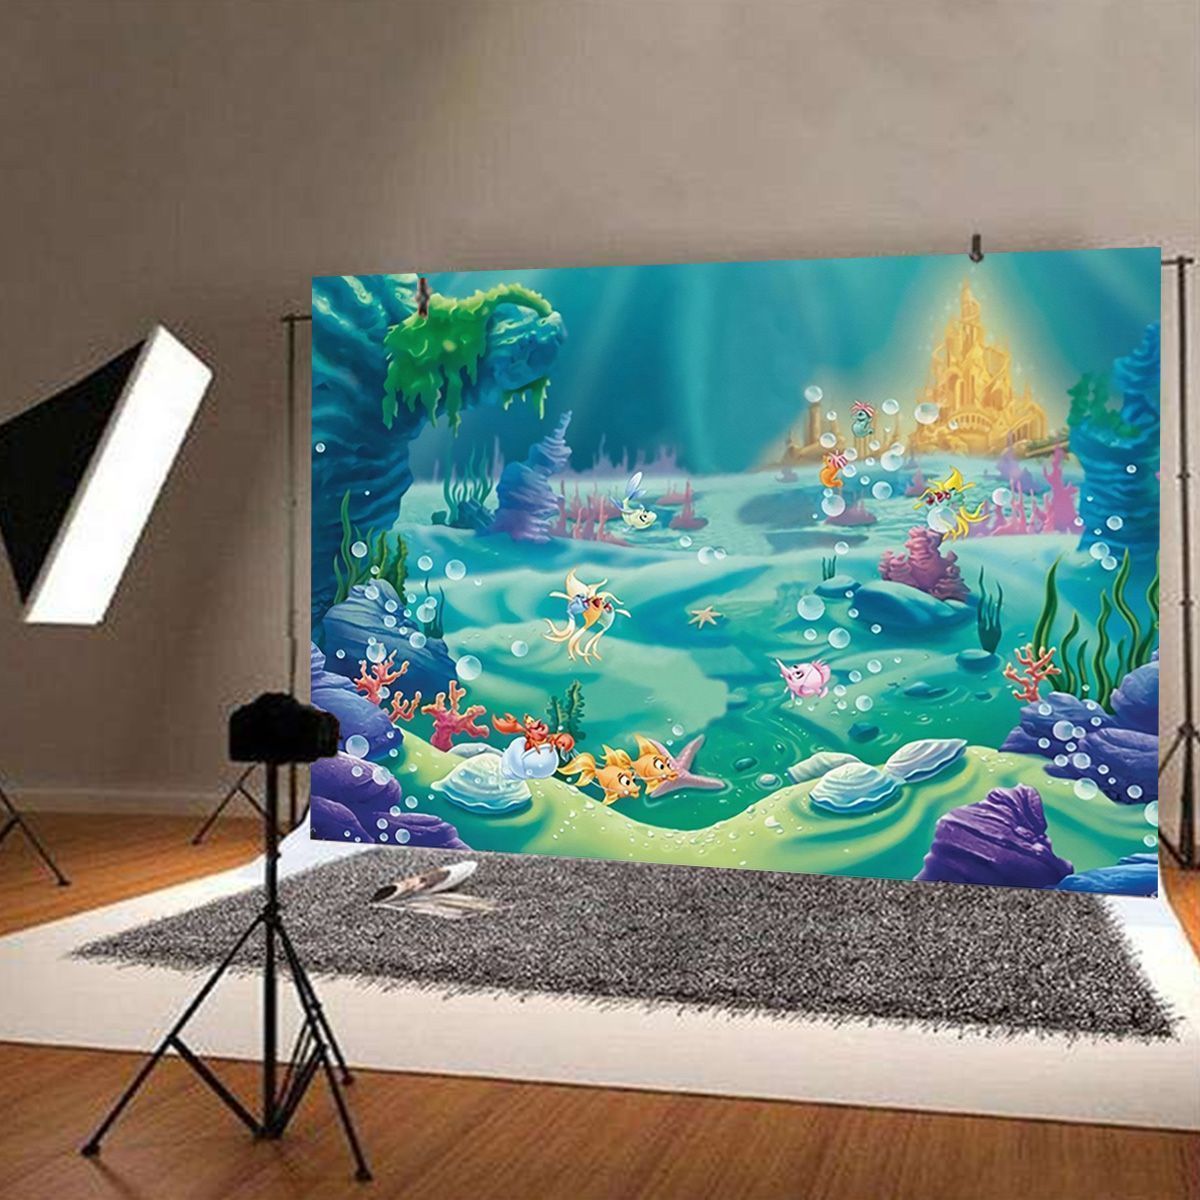 5x3FT-7x5FT-9x6FT-Underwater-Castle-Fish-Studio-Photography-Backdrops-Background-1680239